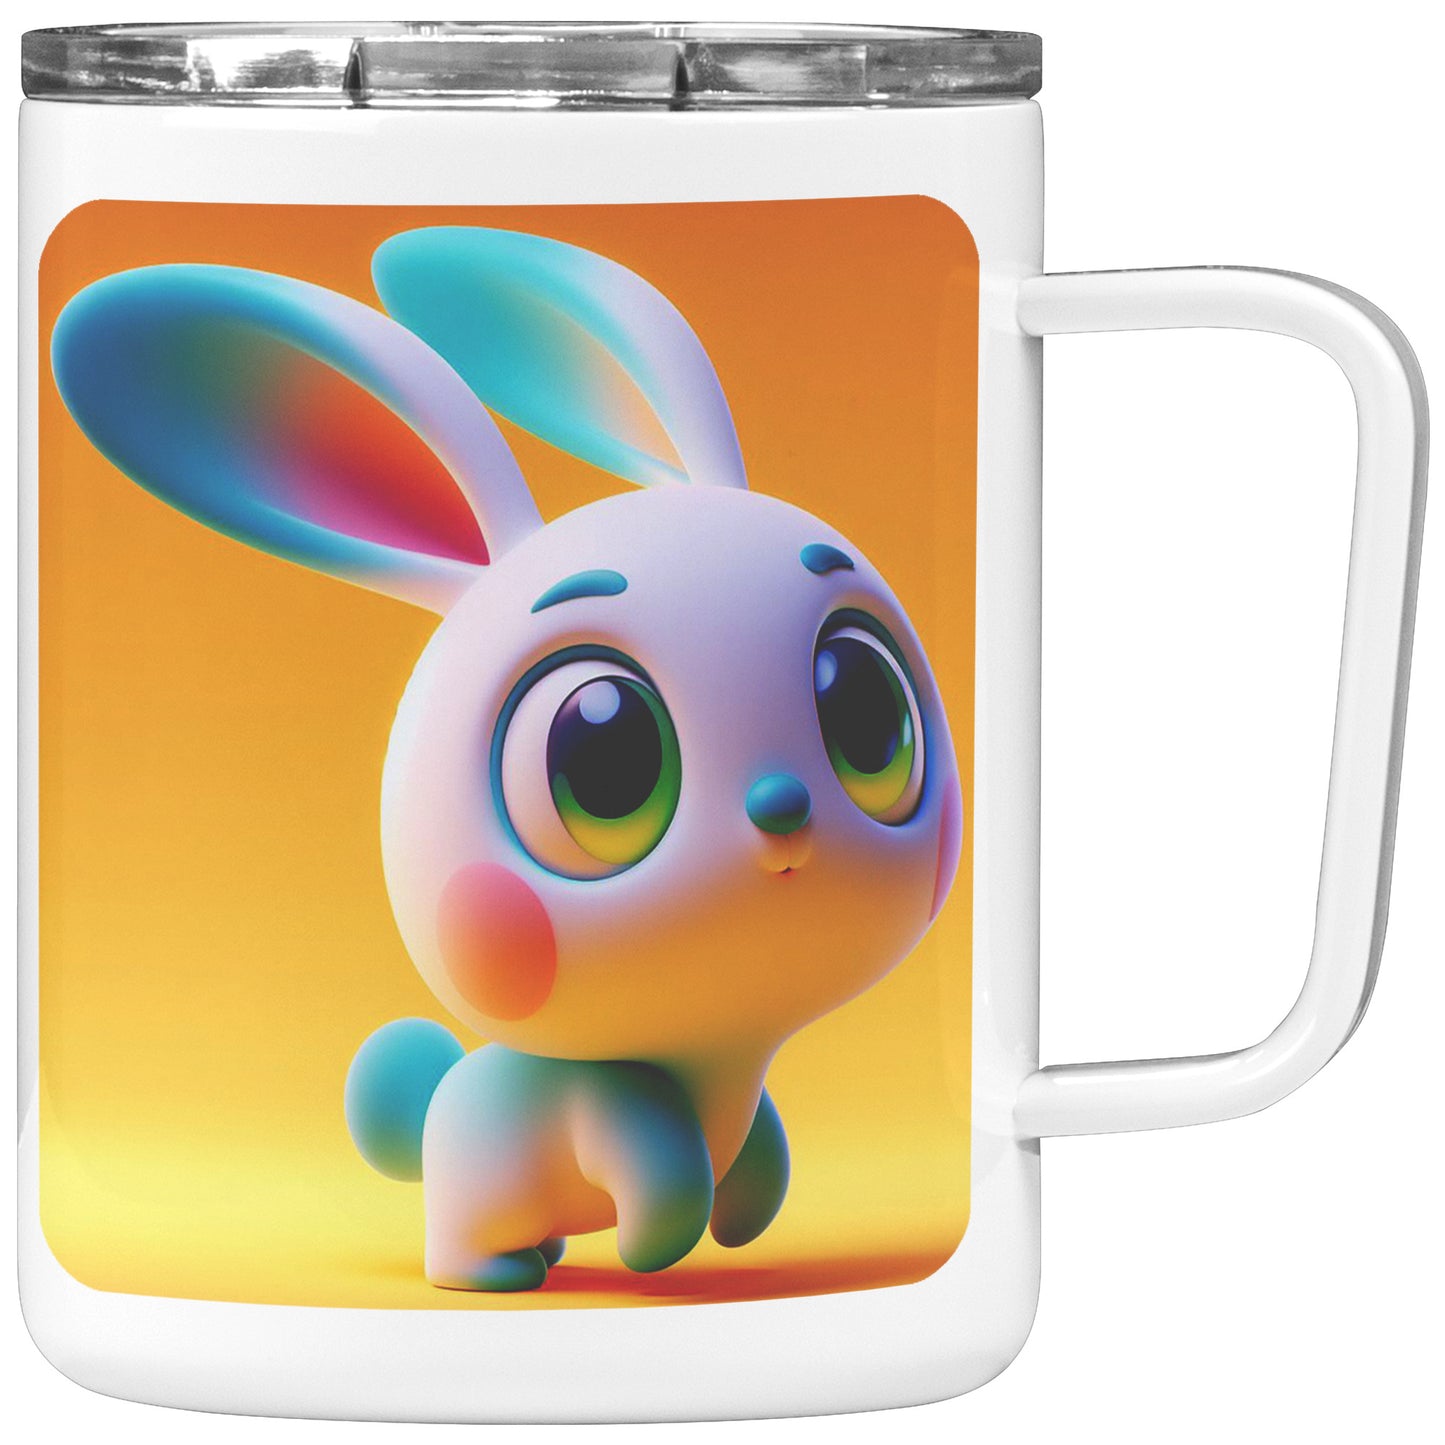 Animals, Insects and Birds - Bunny Coffee Mug #6